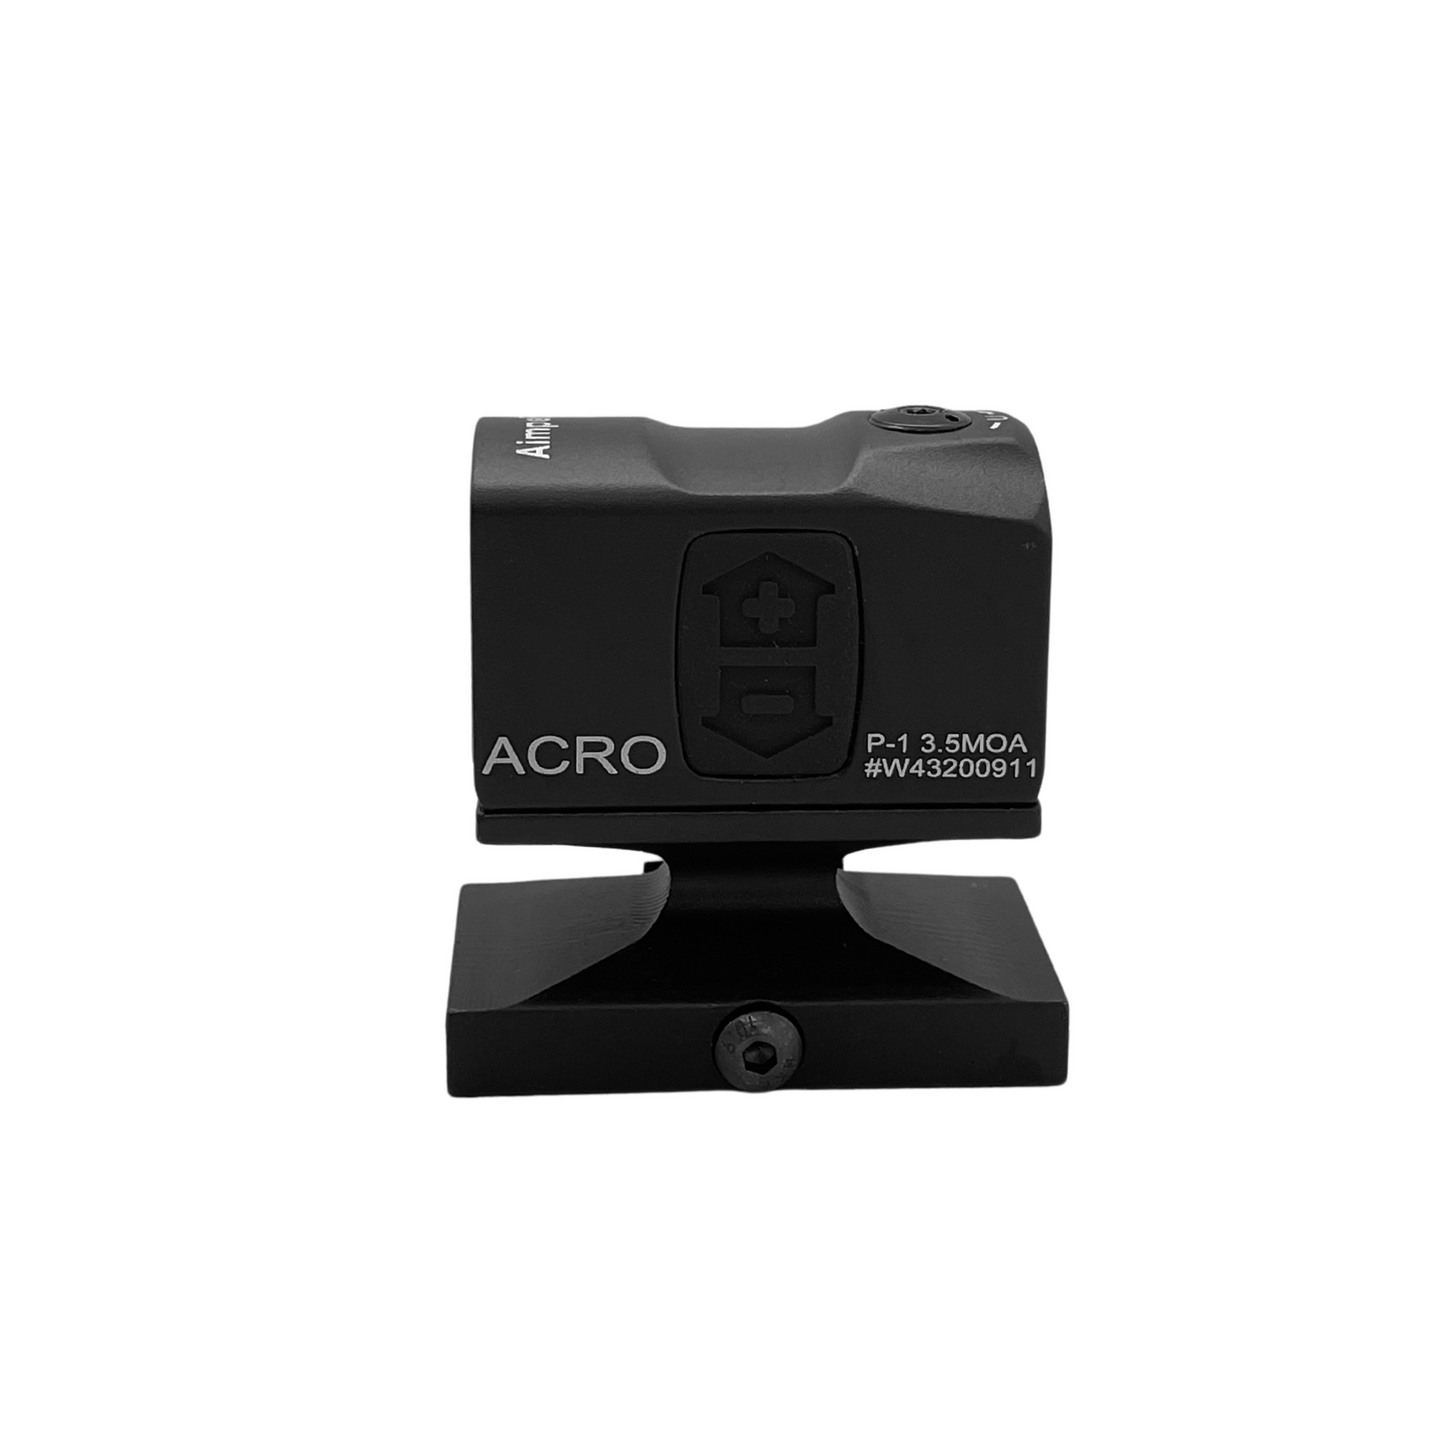 Aimpoint ACRO-P1 Red Dot Sight (Precision)